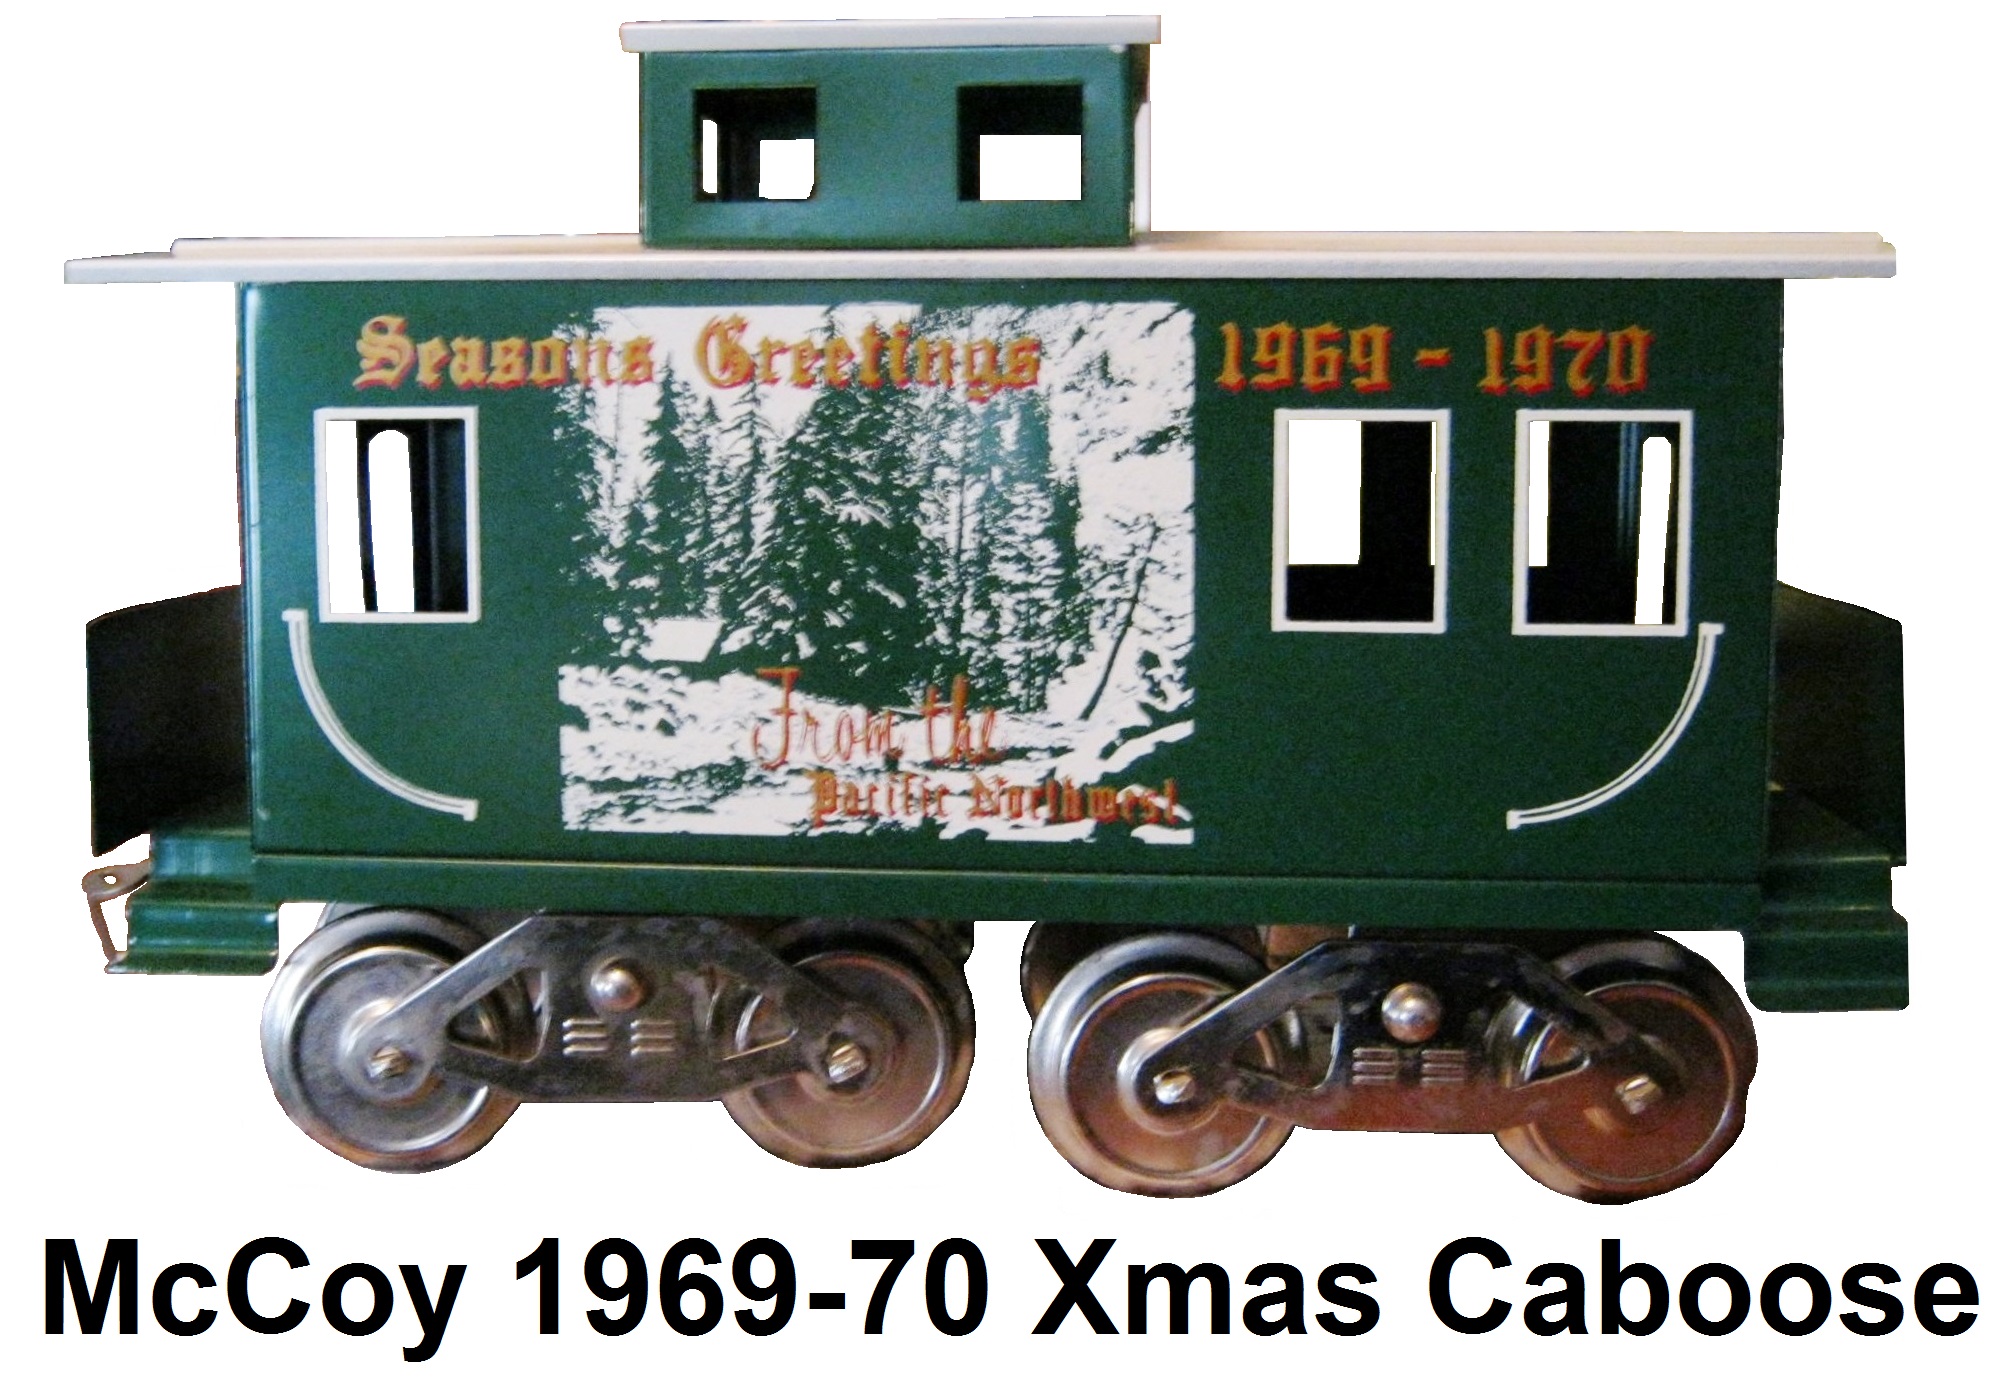 McCoy Season's Greetings 1969-1970 From the Pacific Northwest caboose